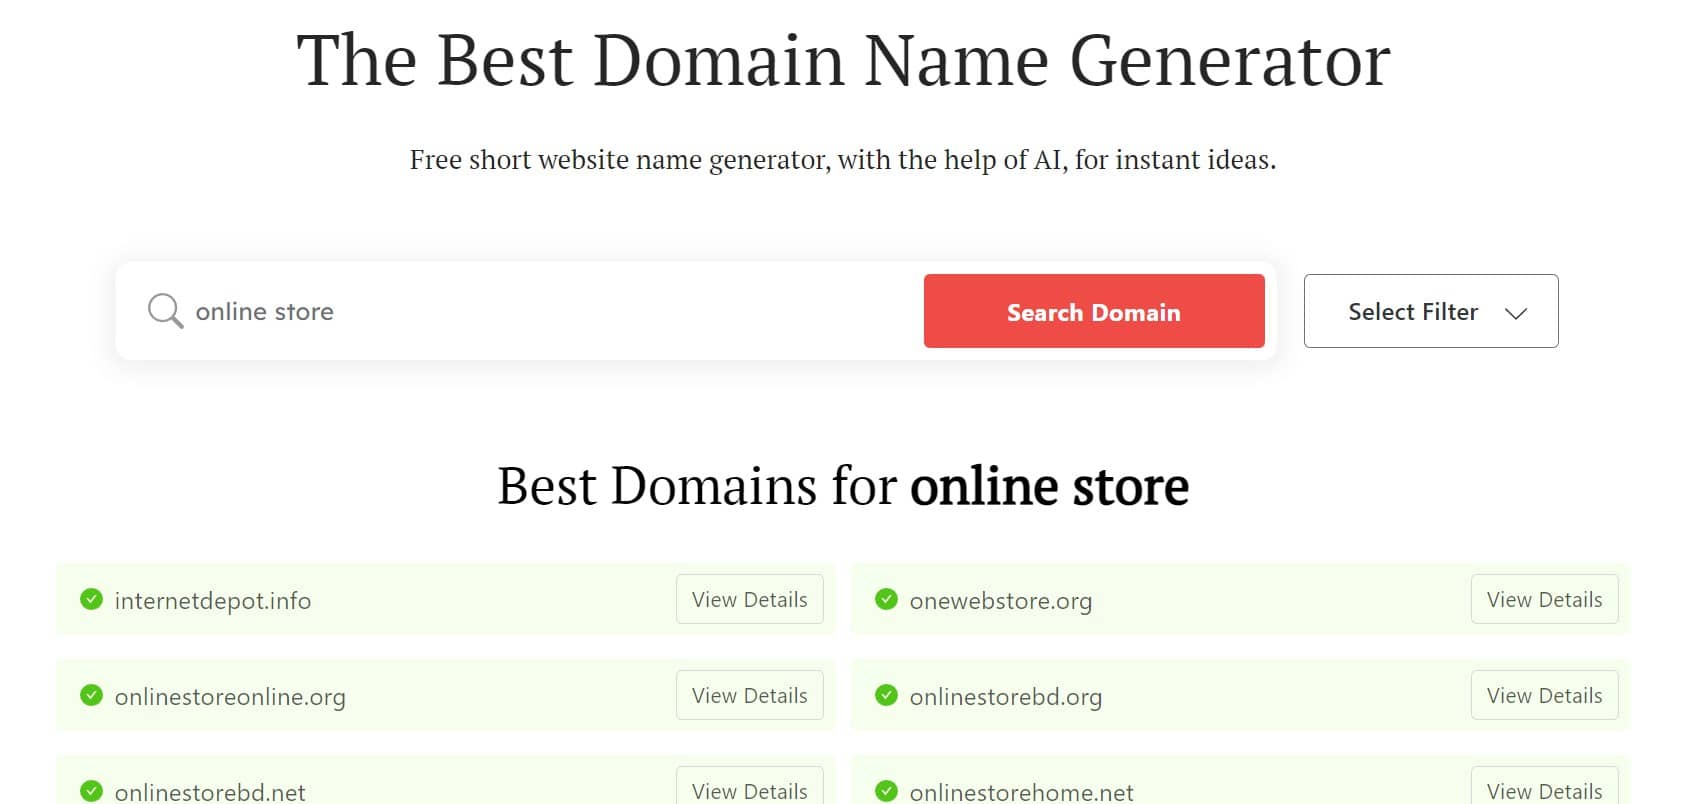 DomainWheel shop name generator search results for "online store"